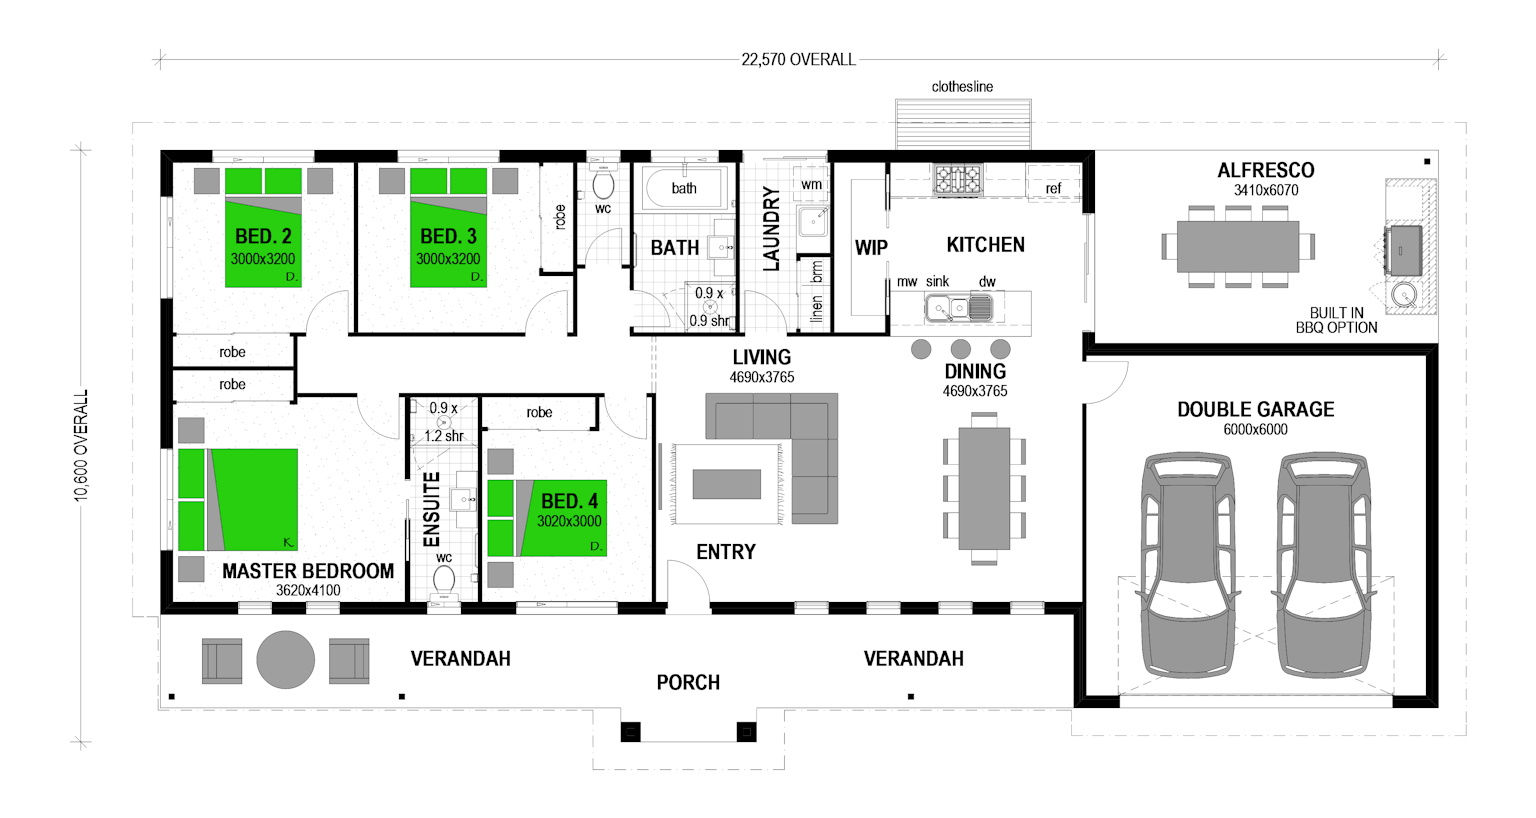 3000m2 section with big home floor plan